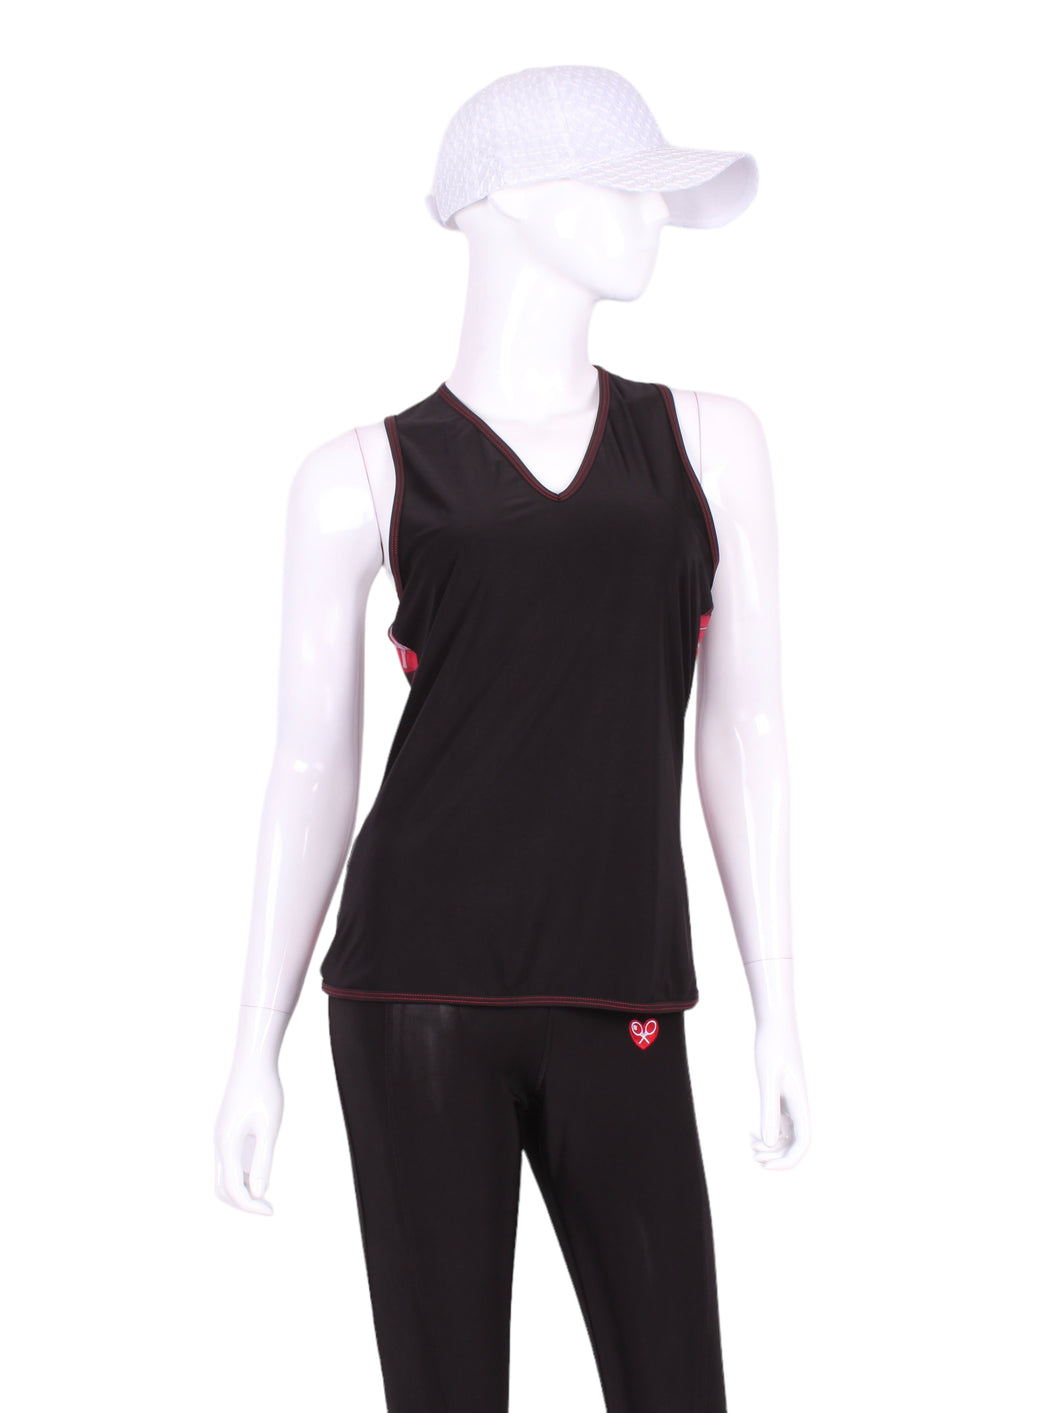 A fun tennis tank top - with Hearts - light mesh back - and quick-drying breathable fabric.  Vee front and tee back with two-needle cover stitches at each seam.   Smooth black binding and red stitching finishes the edges with a touch of sass.  